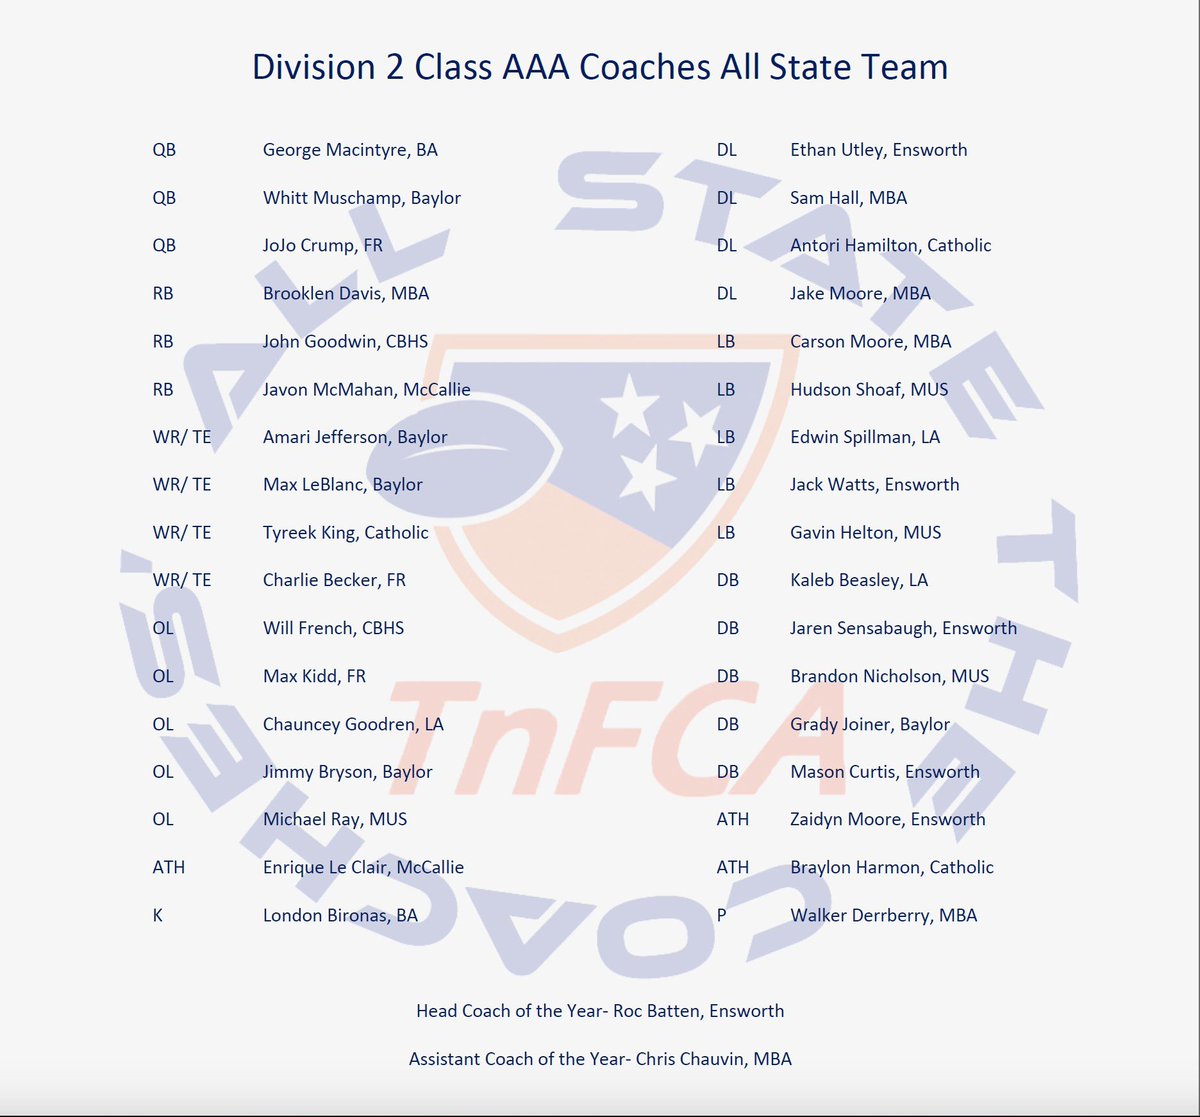 Congratulations to the Division 2 Class AAA All State Team that was nominated and selected by The Coaches